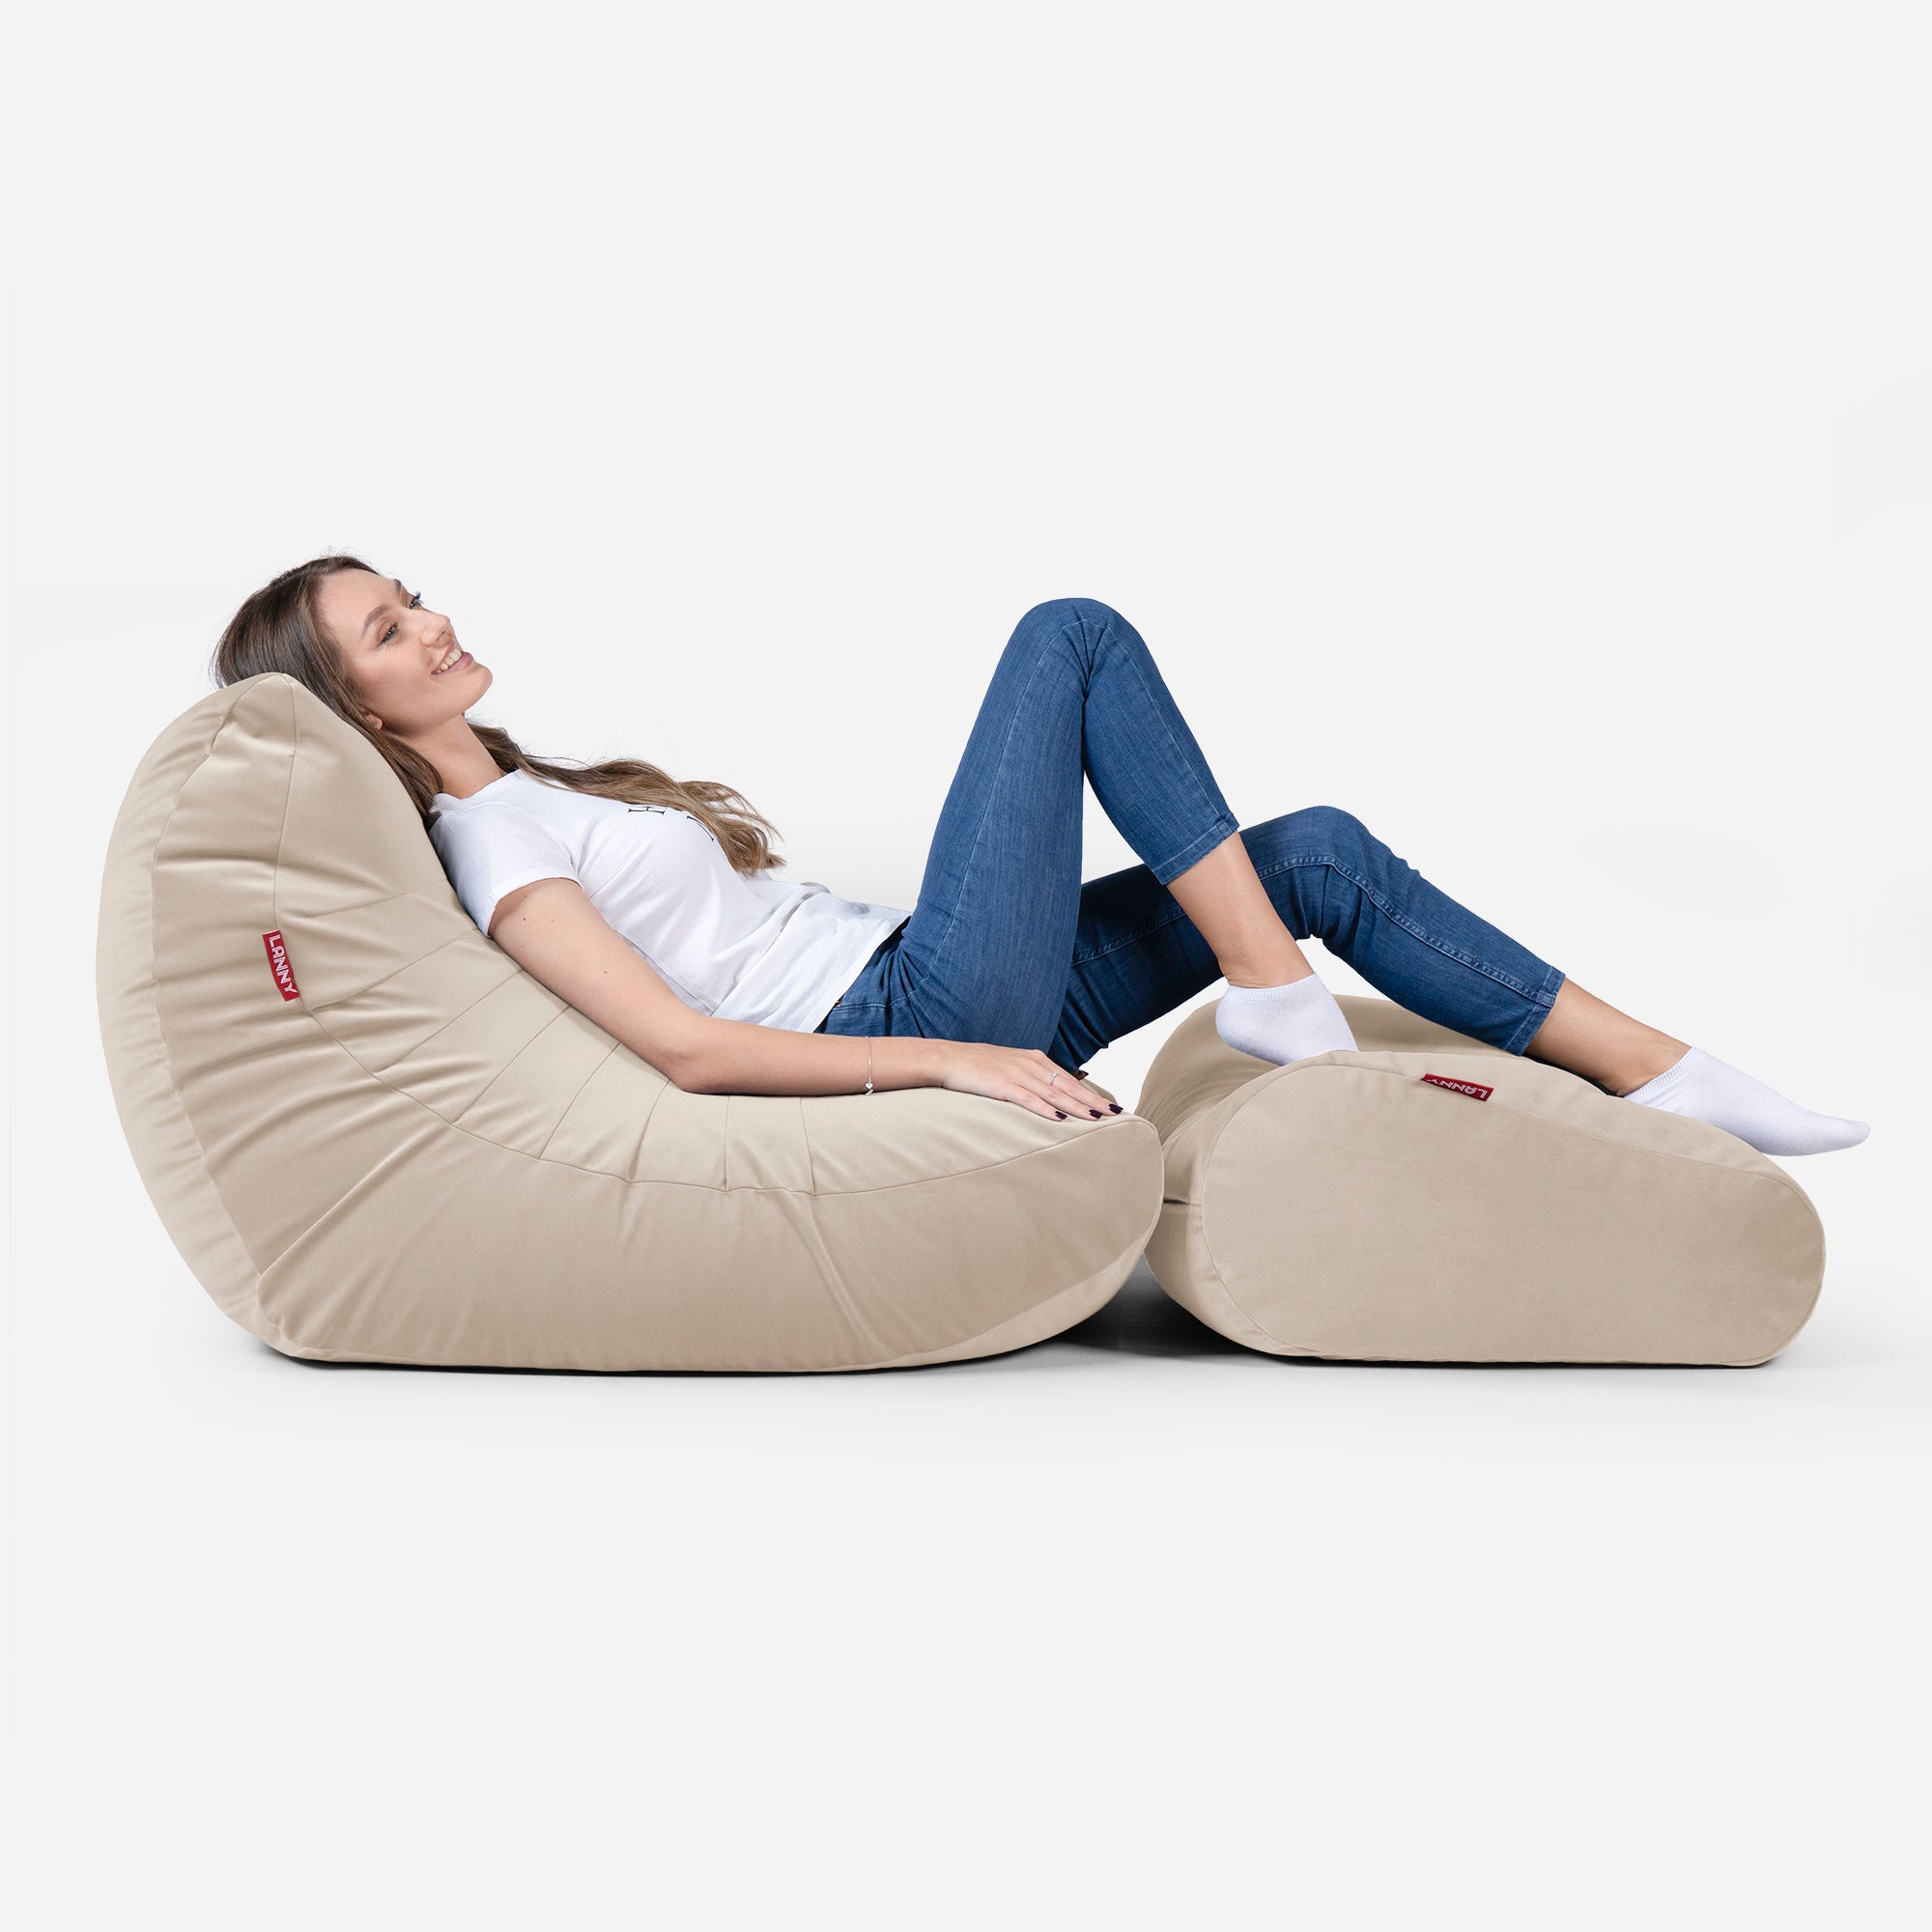 Beanbag Curvy Design Beige color with girl seating on it 